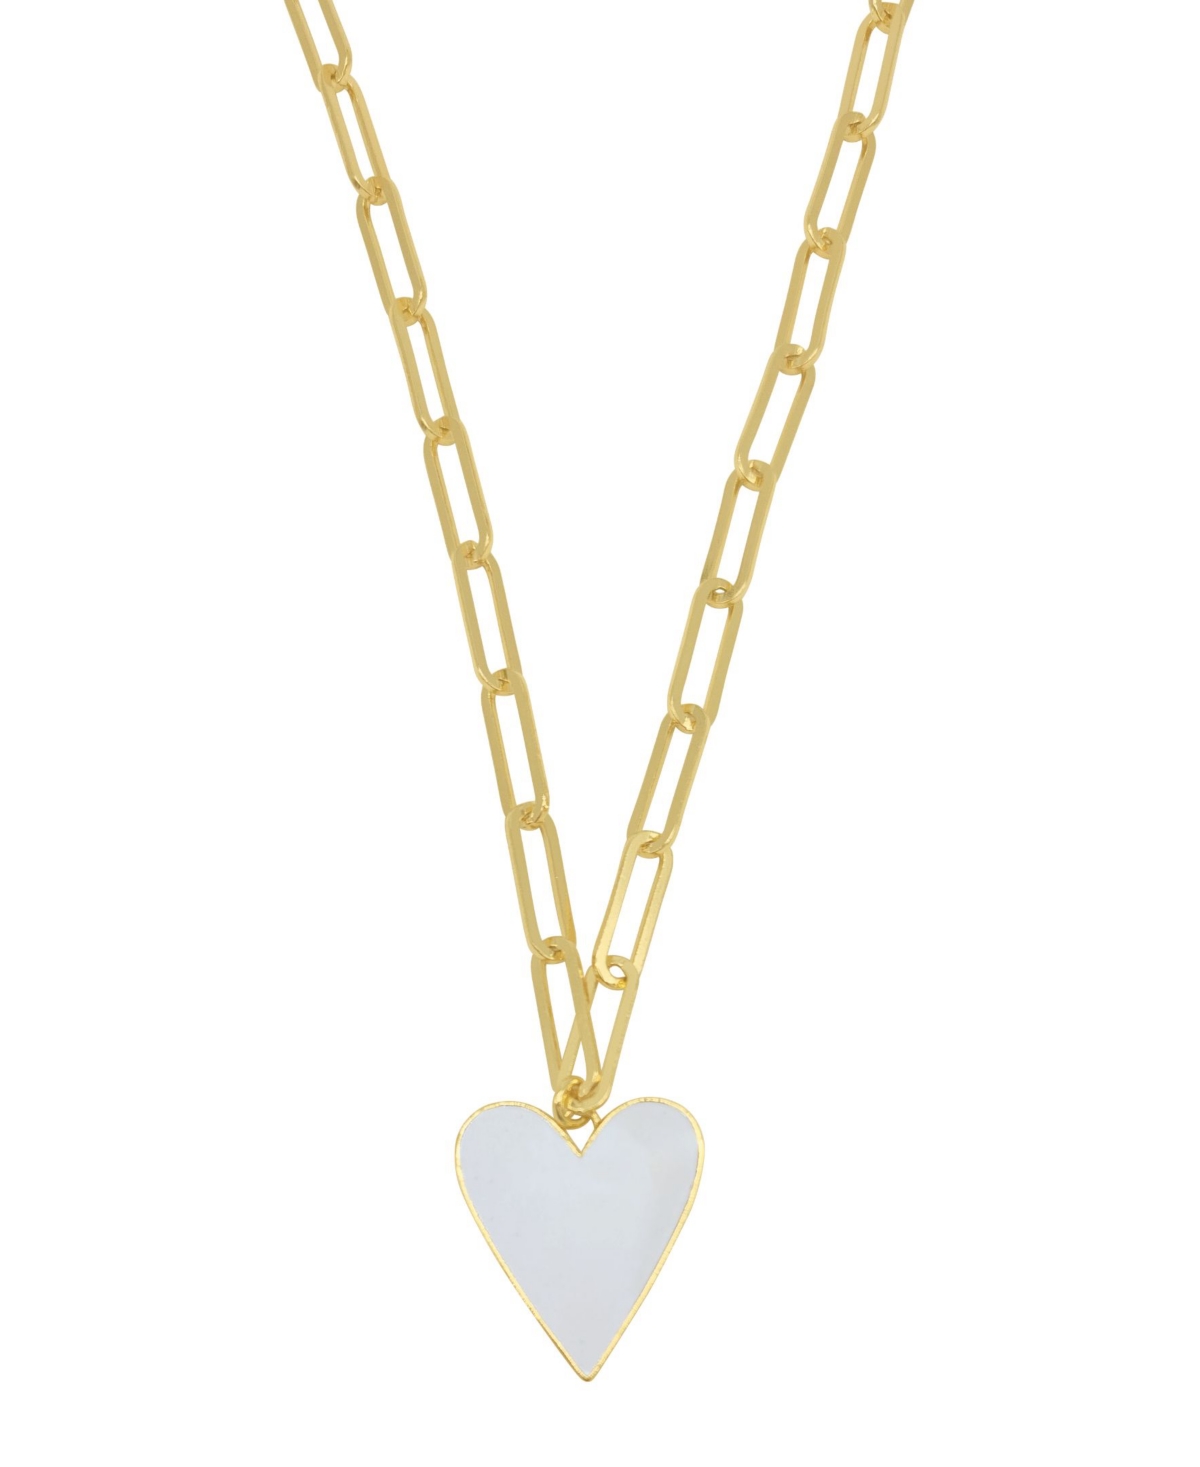 Shop Adornia 20-22" Adjustable 14k Gold Plated White Enamel Heart Paper Clip Chain Necklace